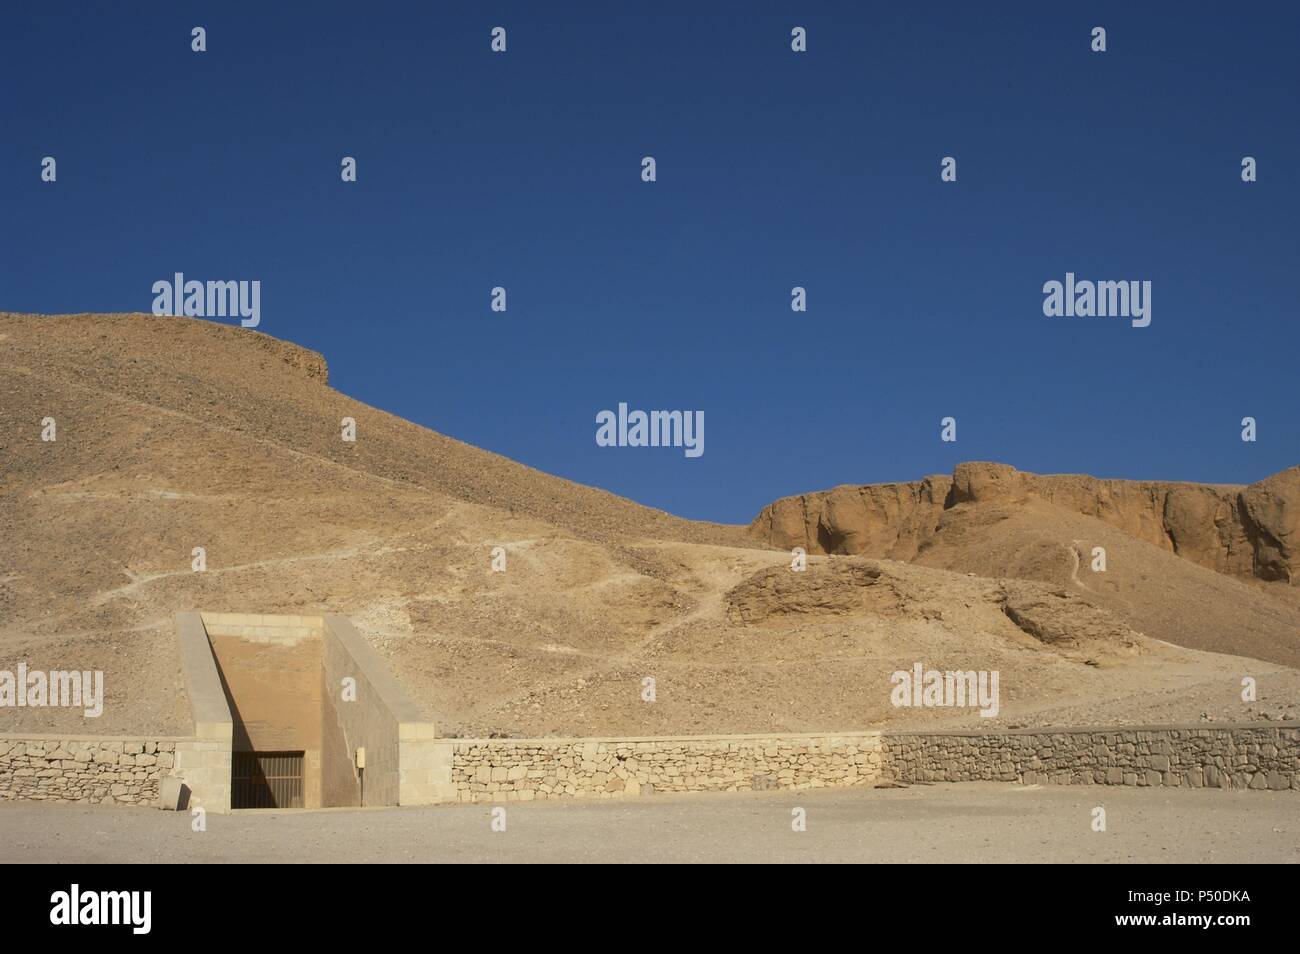 Valley of the Kings. On the walls are carved rock tombs of New Kingdom pharaohs. Entrance to the tomb of the Pharaoh Ramses IV. Egypt. Stock Photo